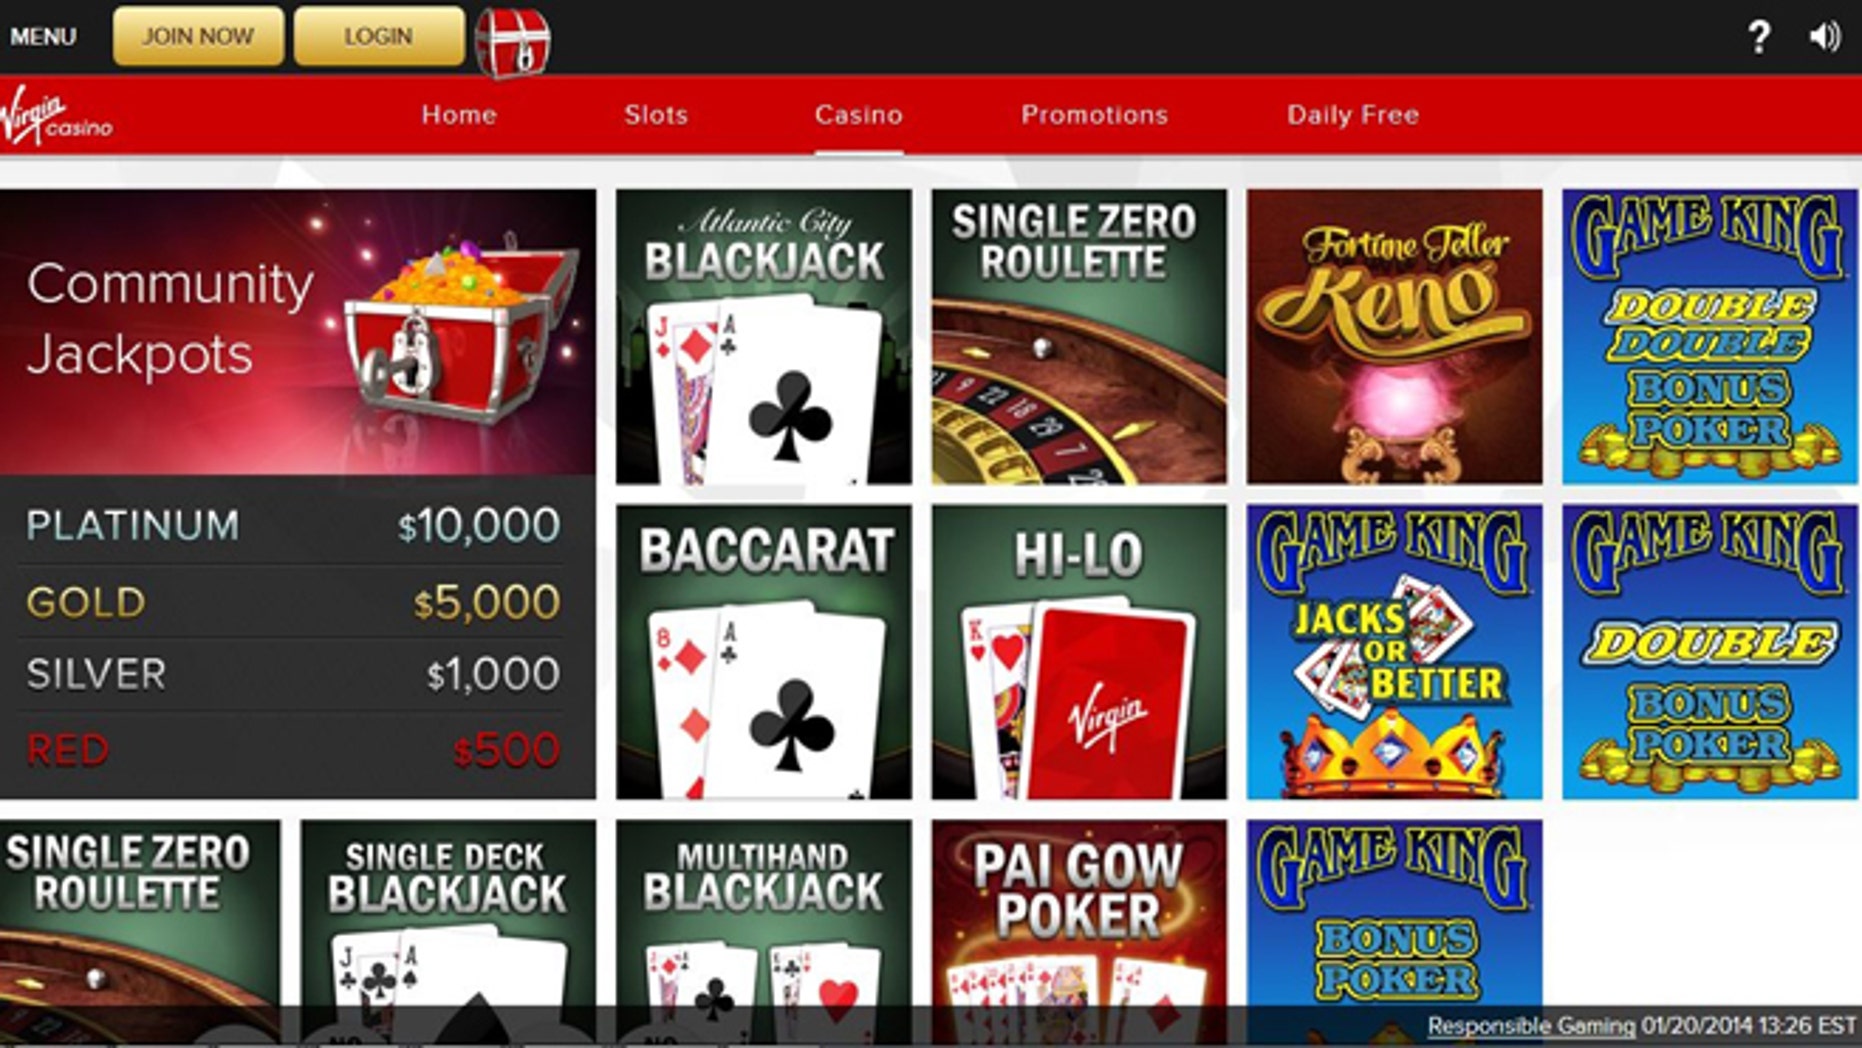 Virgin Casino download the new for windows